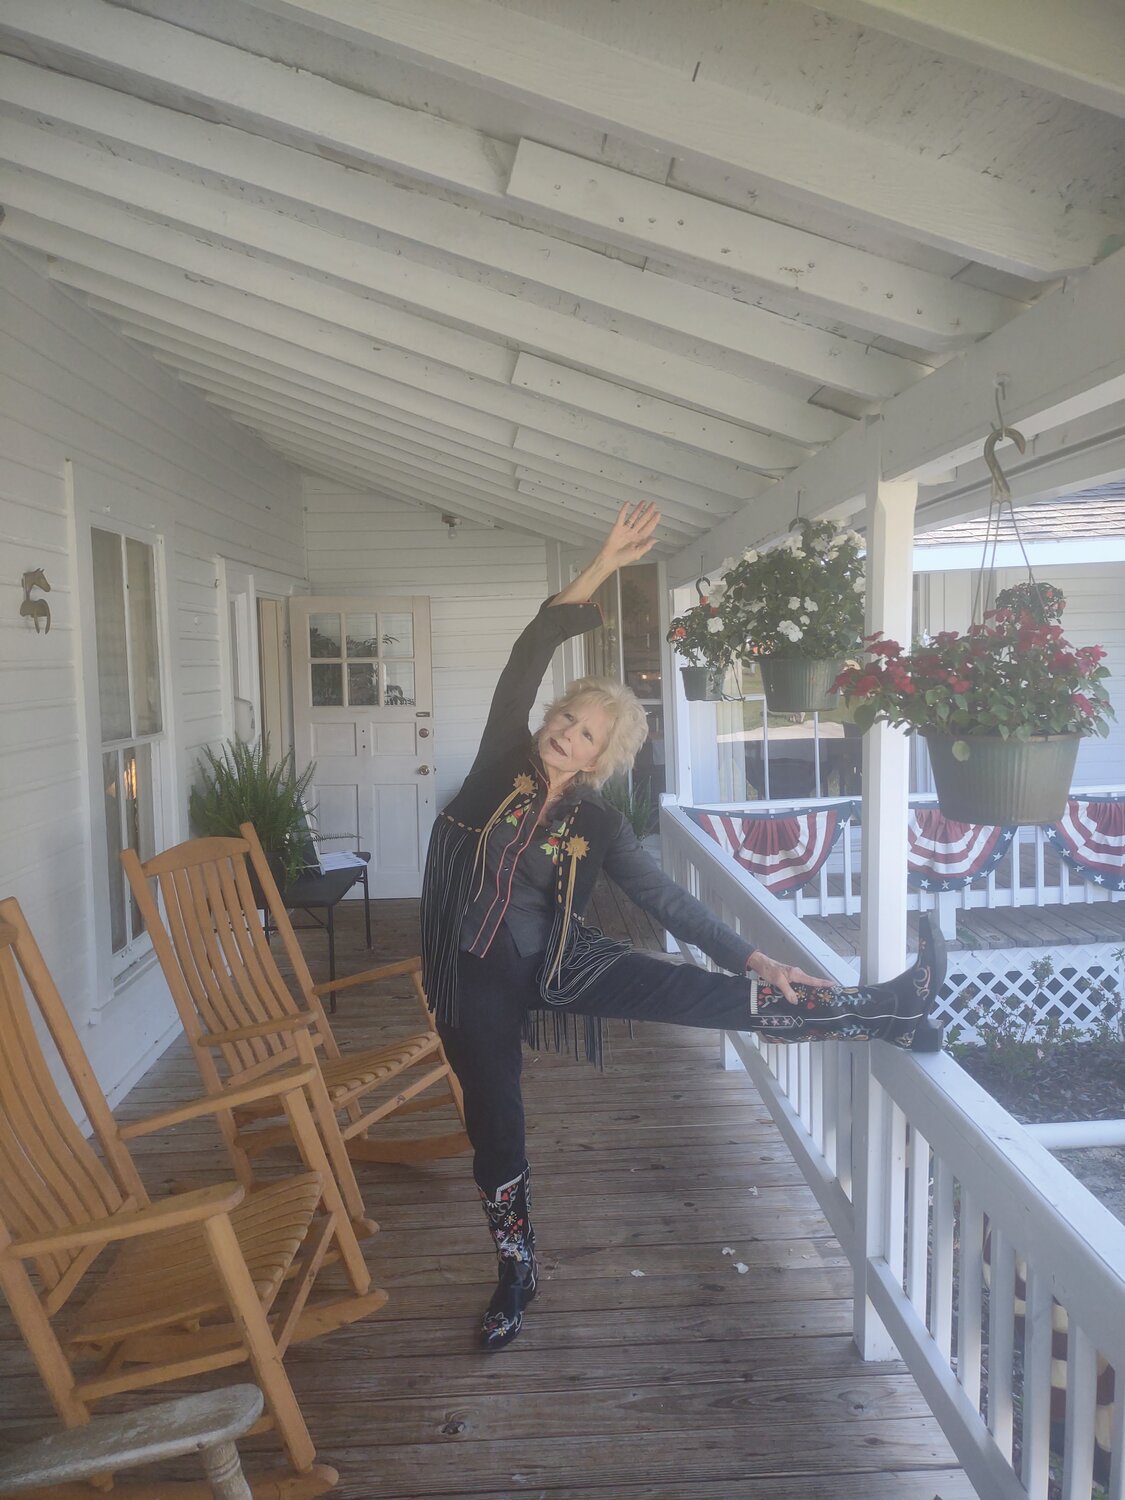 Nancy Dale took her yoga mat to practice postures on the porch dressed in cowboy boots and vest to do yoga and to tell the true stories written in her books of the Florida pioneer “Cow Hunters.”